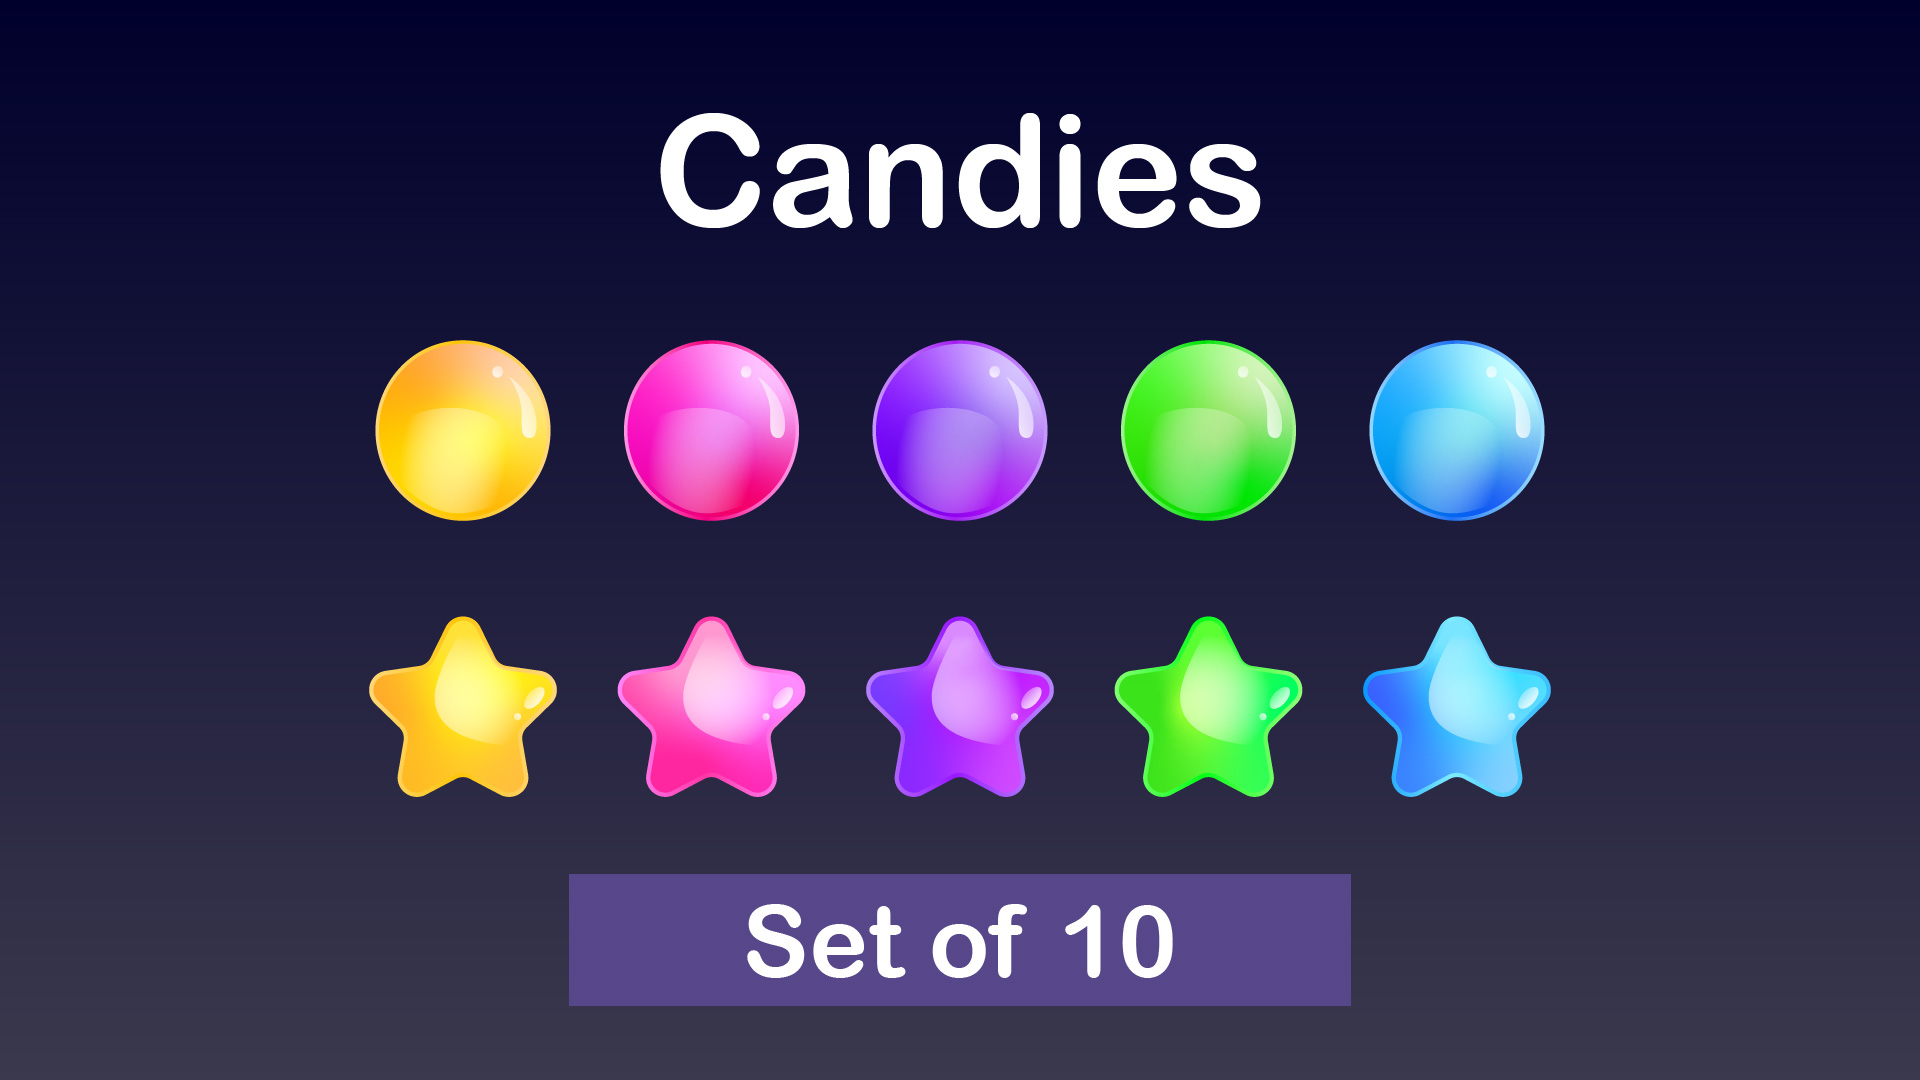 Set of 10 Candy illustrations